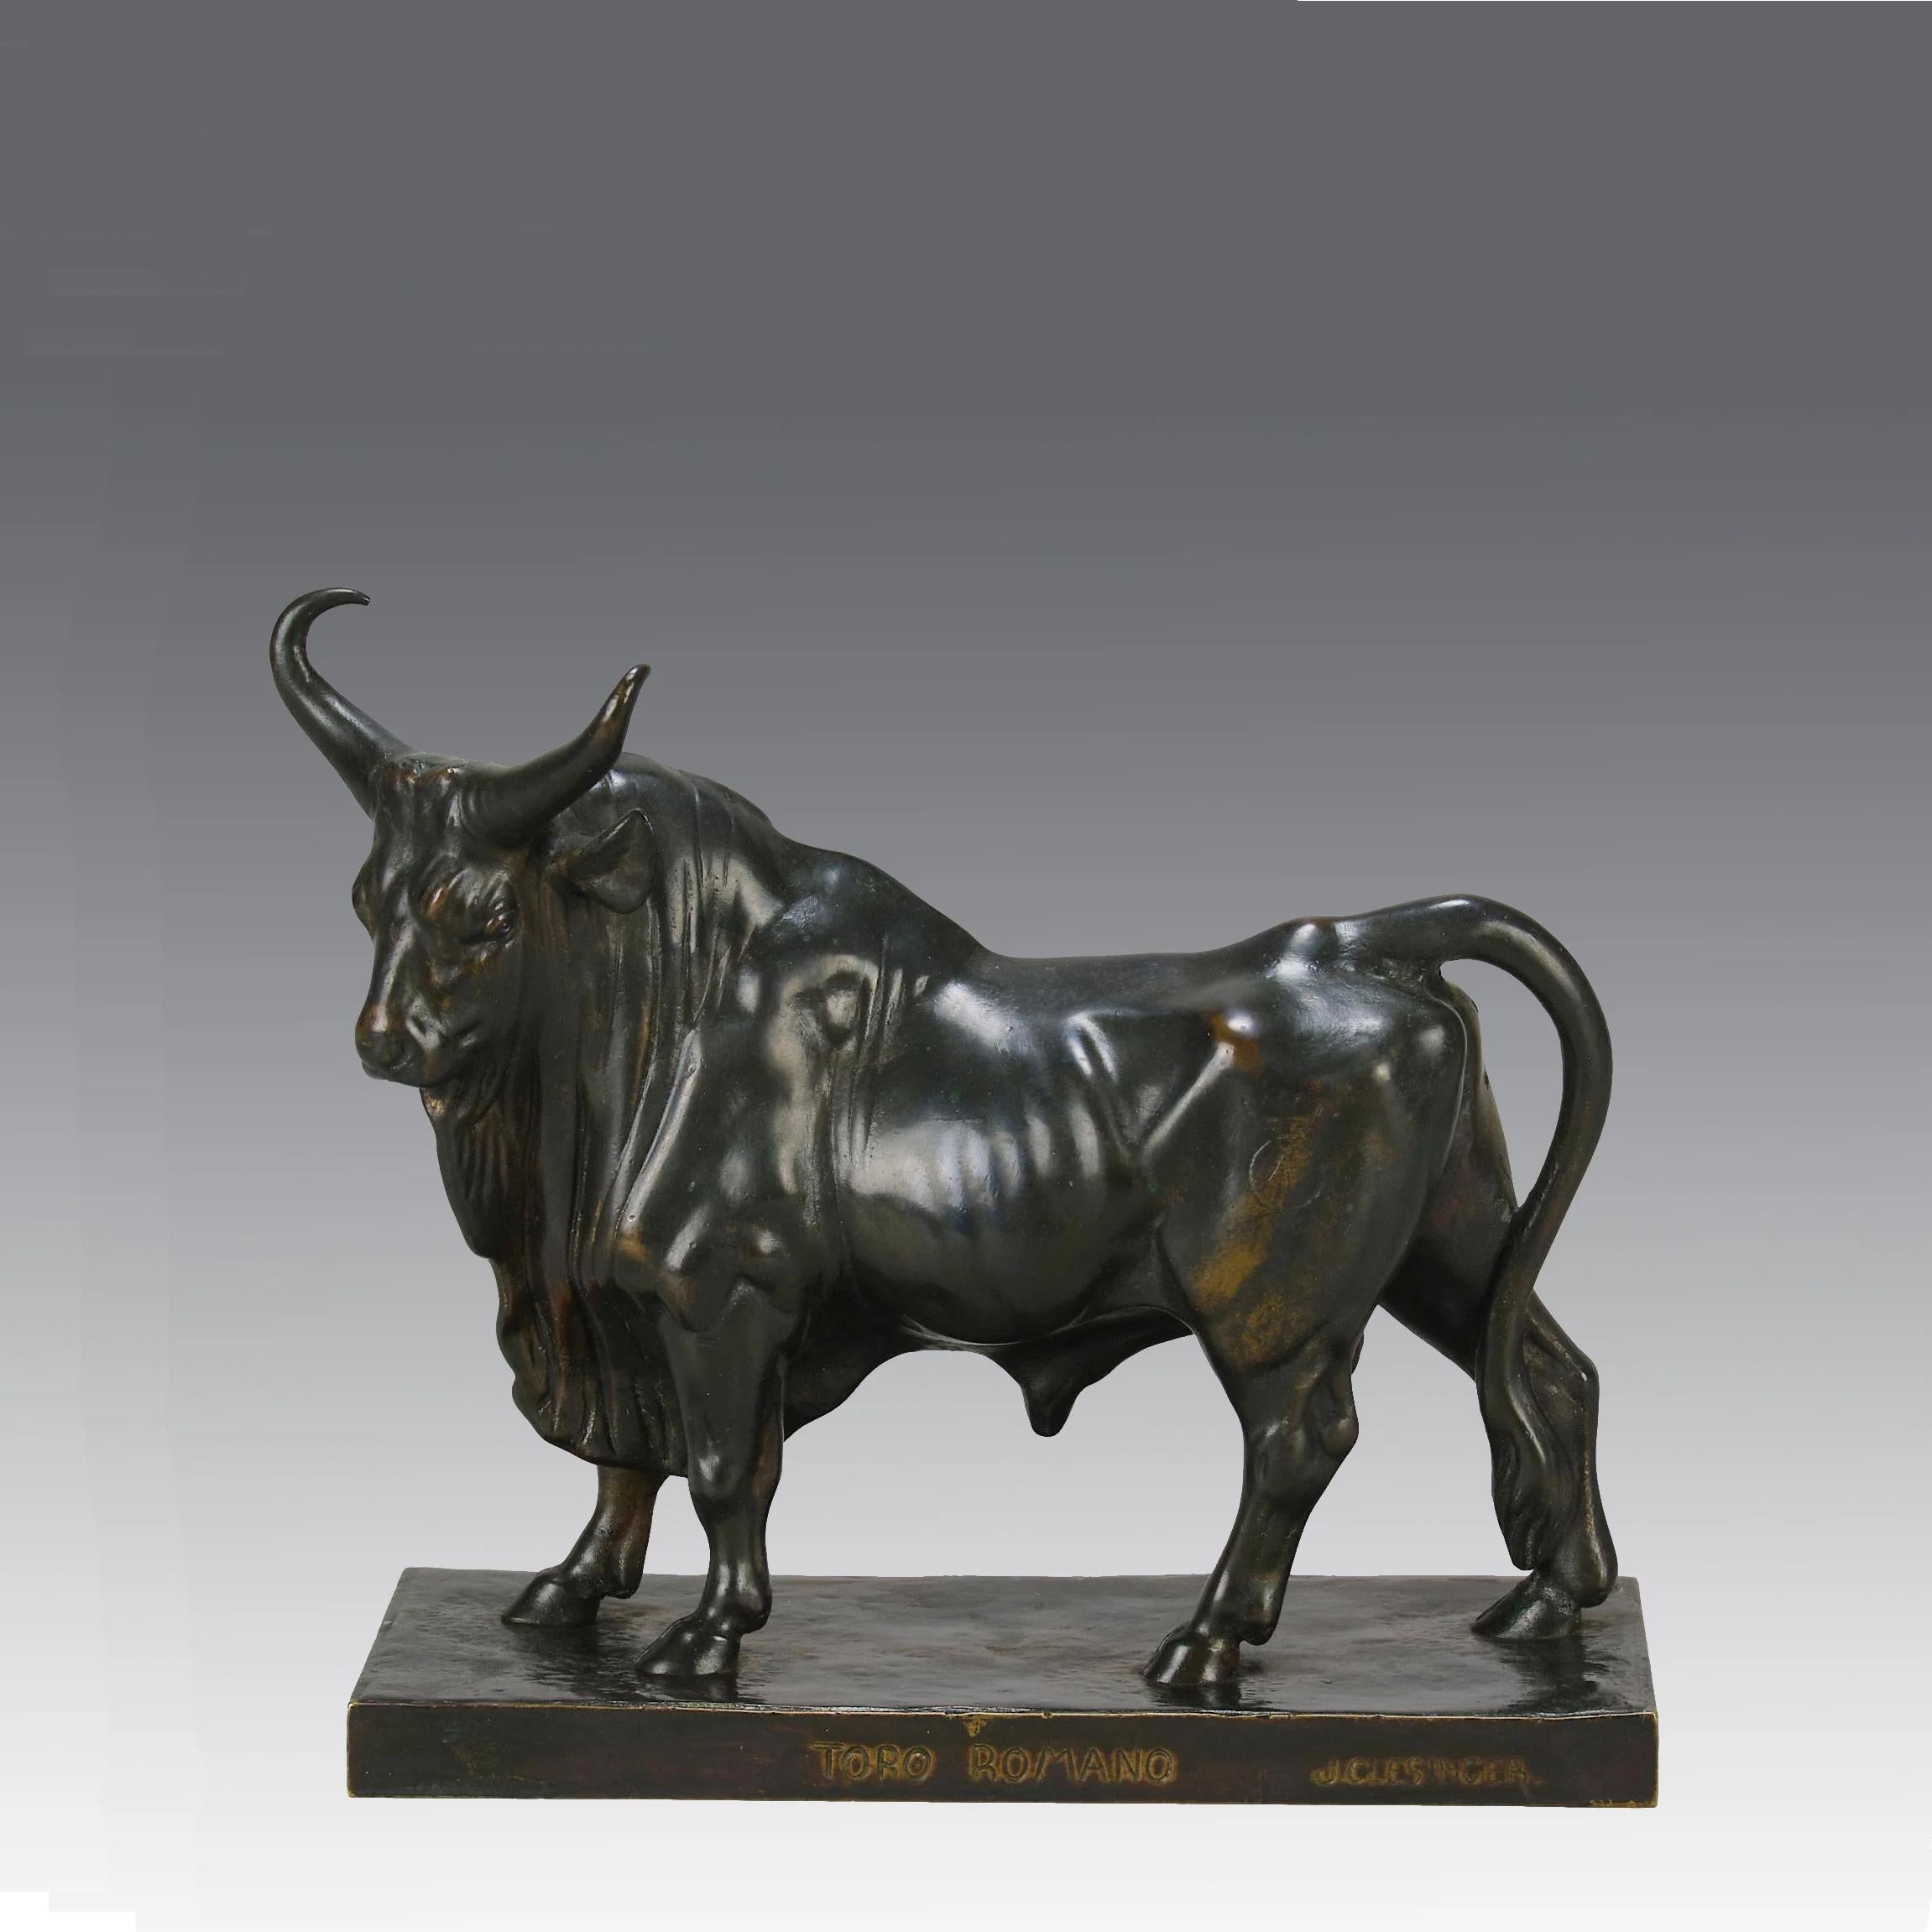 A magnificent late 19th century French bronze study of a large bull in a proud stance, the bronze exhibiting excellent hand chased surface detail and fine rich brown patina. Raised on an integral base, signed Clesinger, titled and with foundry